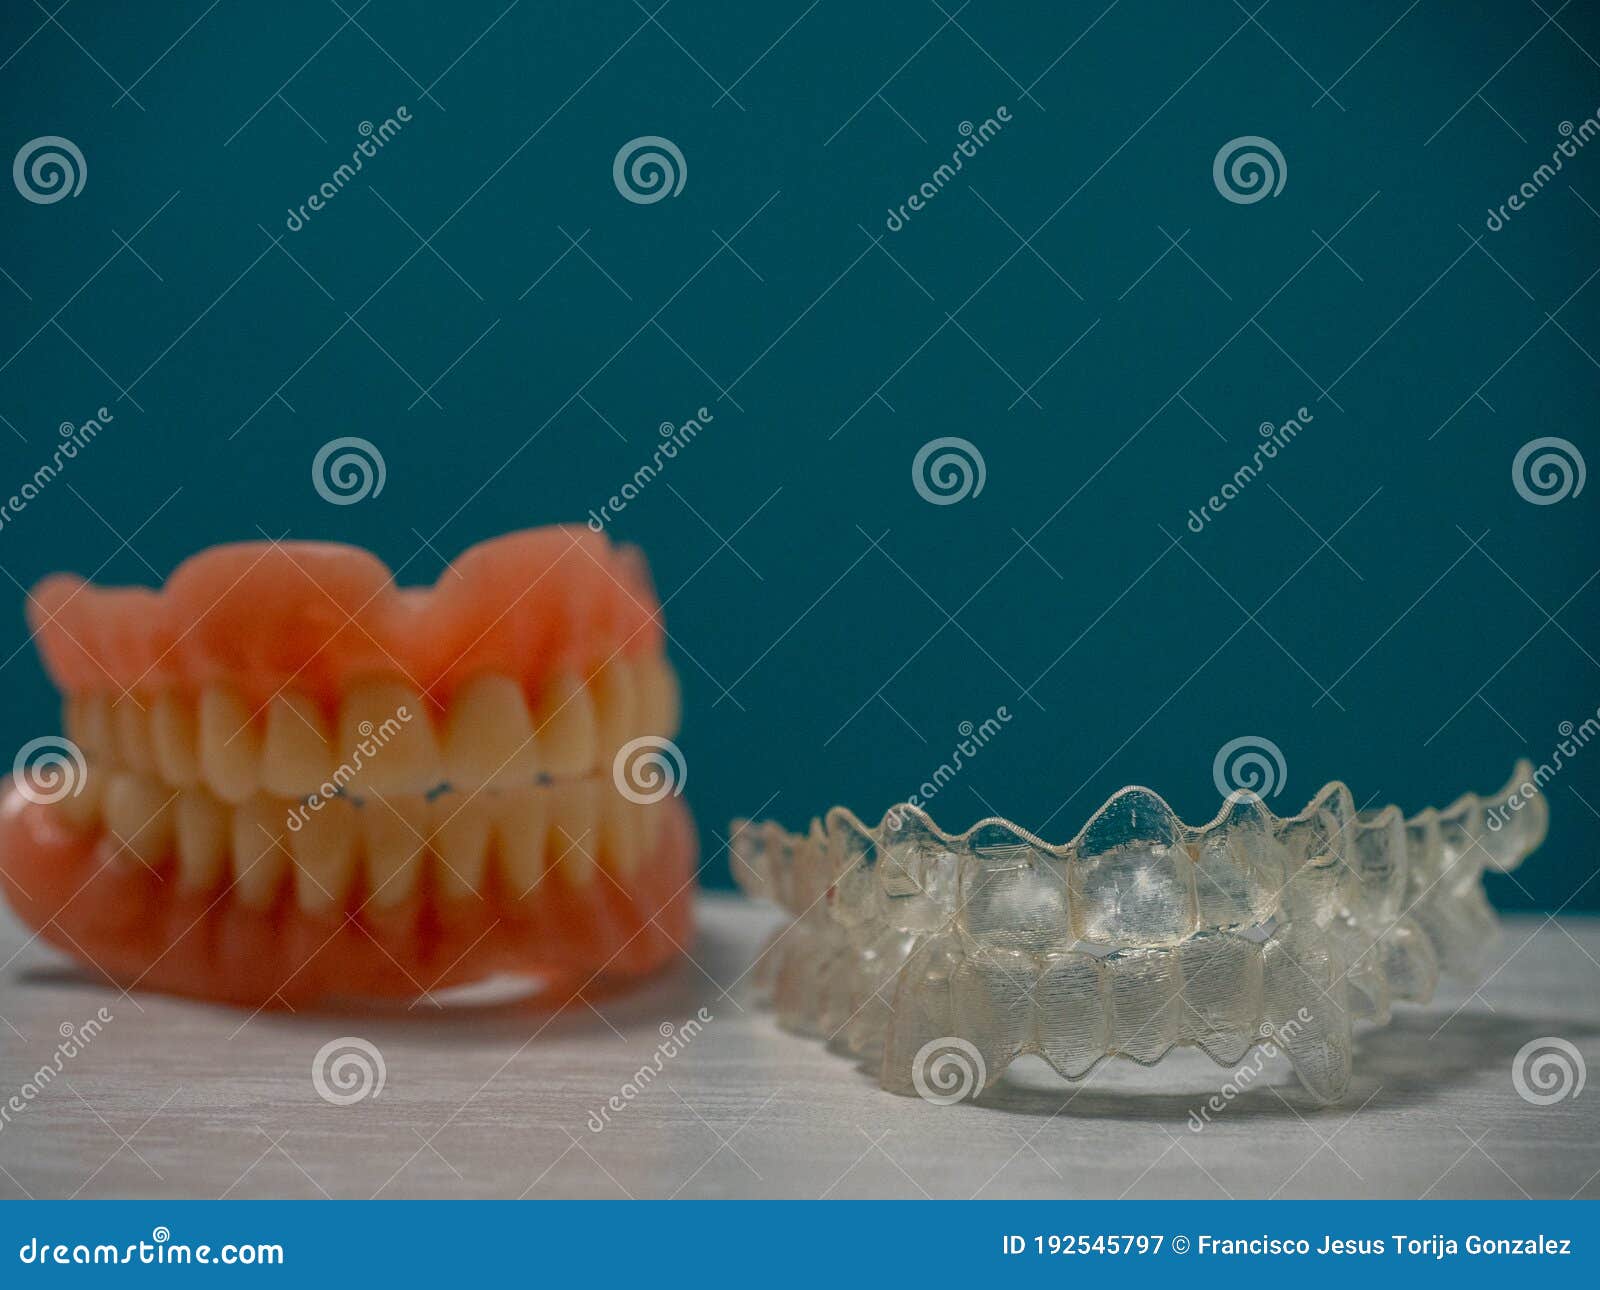 a set of teeth, together with an invisaling braces on a blue background